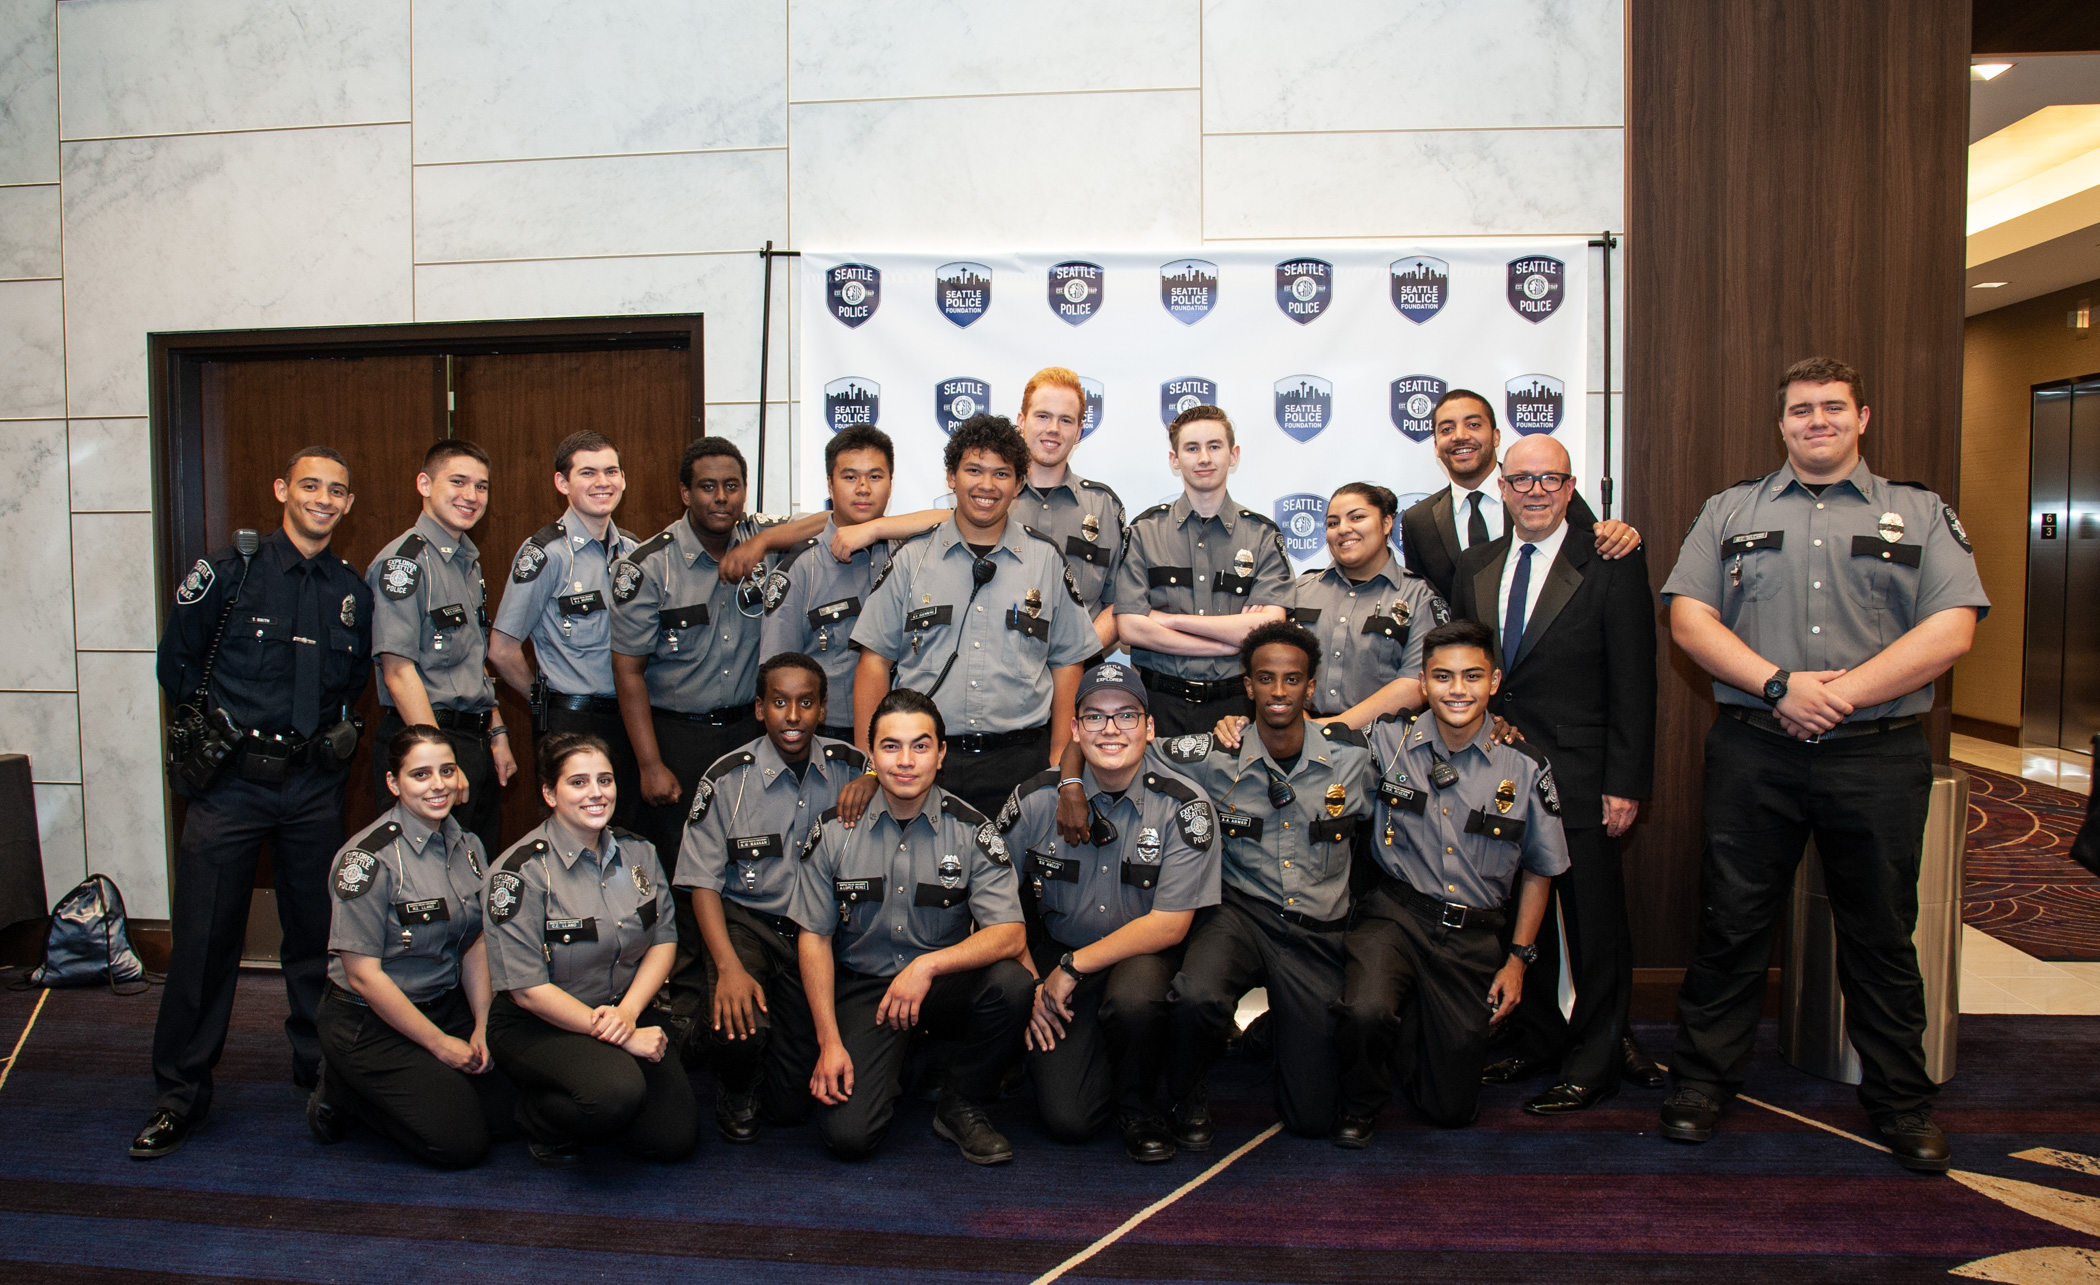 The Seattle Police Law Enforcement Explorers Seattle Police Foundation